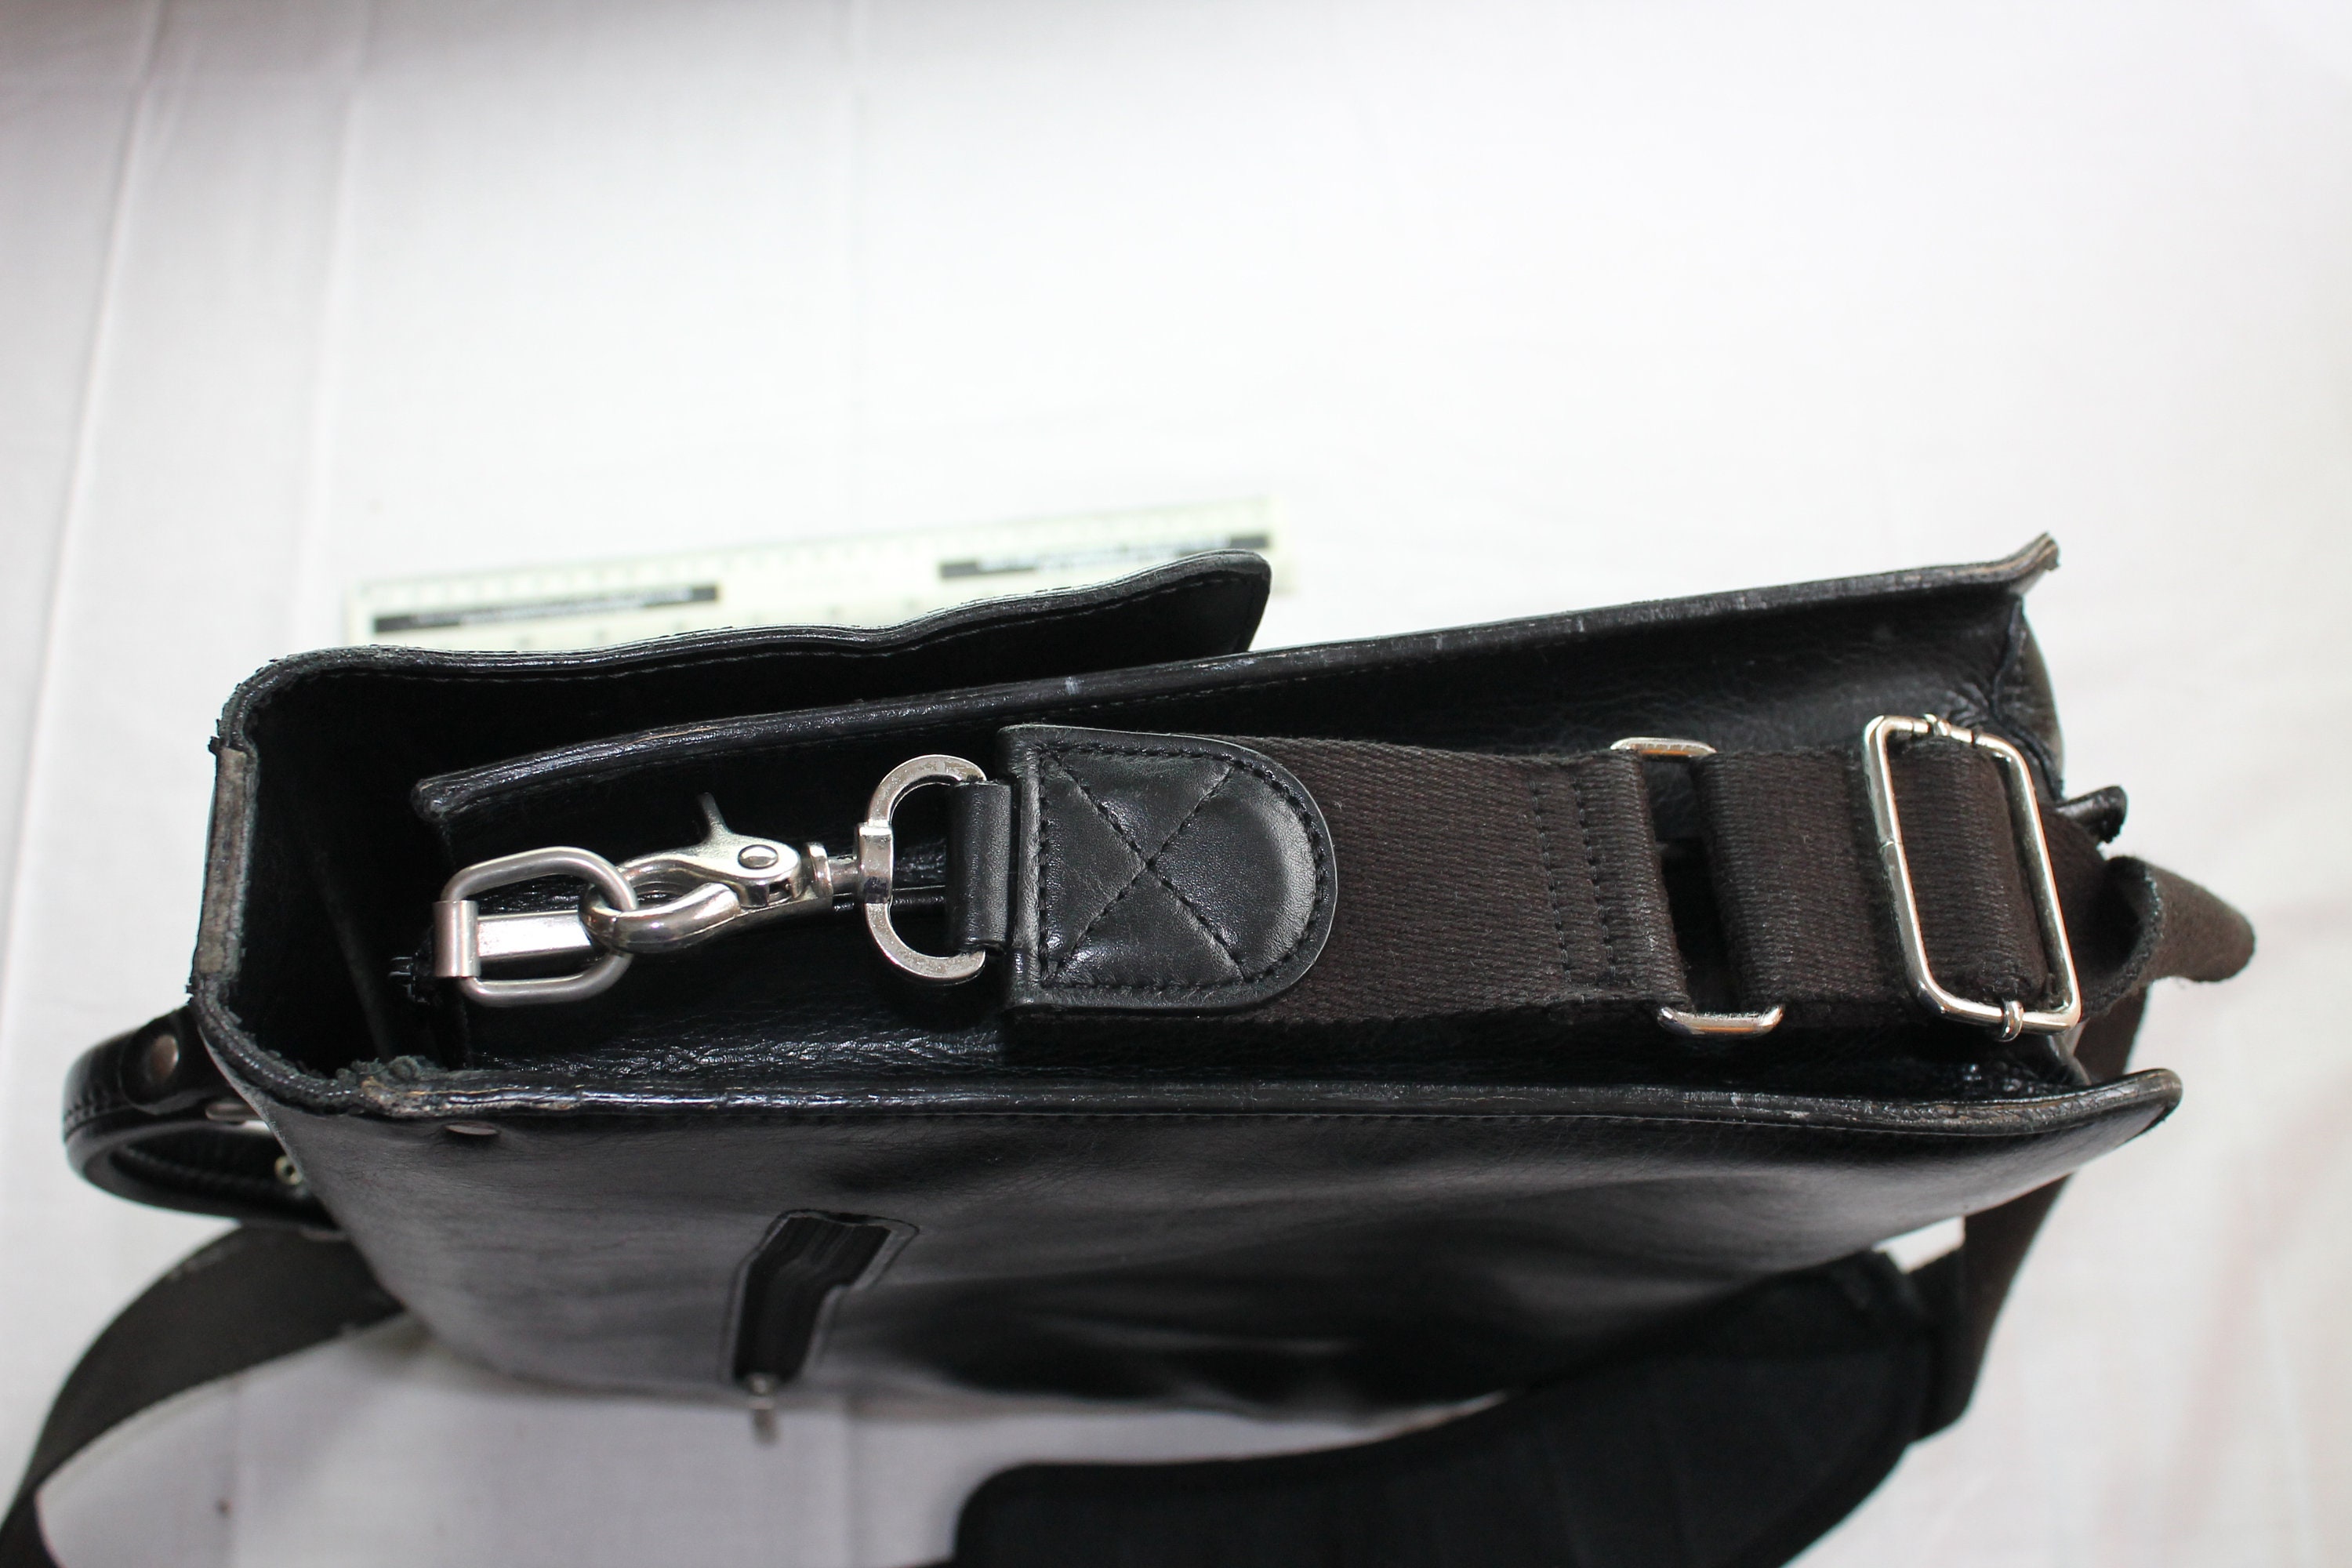 Exceptional Quality Texier Black Leather Briefcase or Shoulder Bag ...